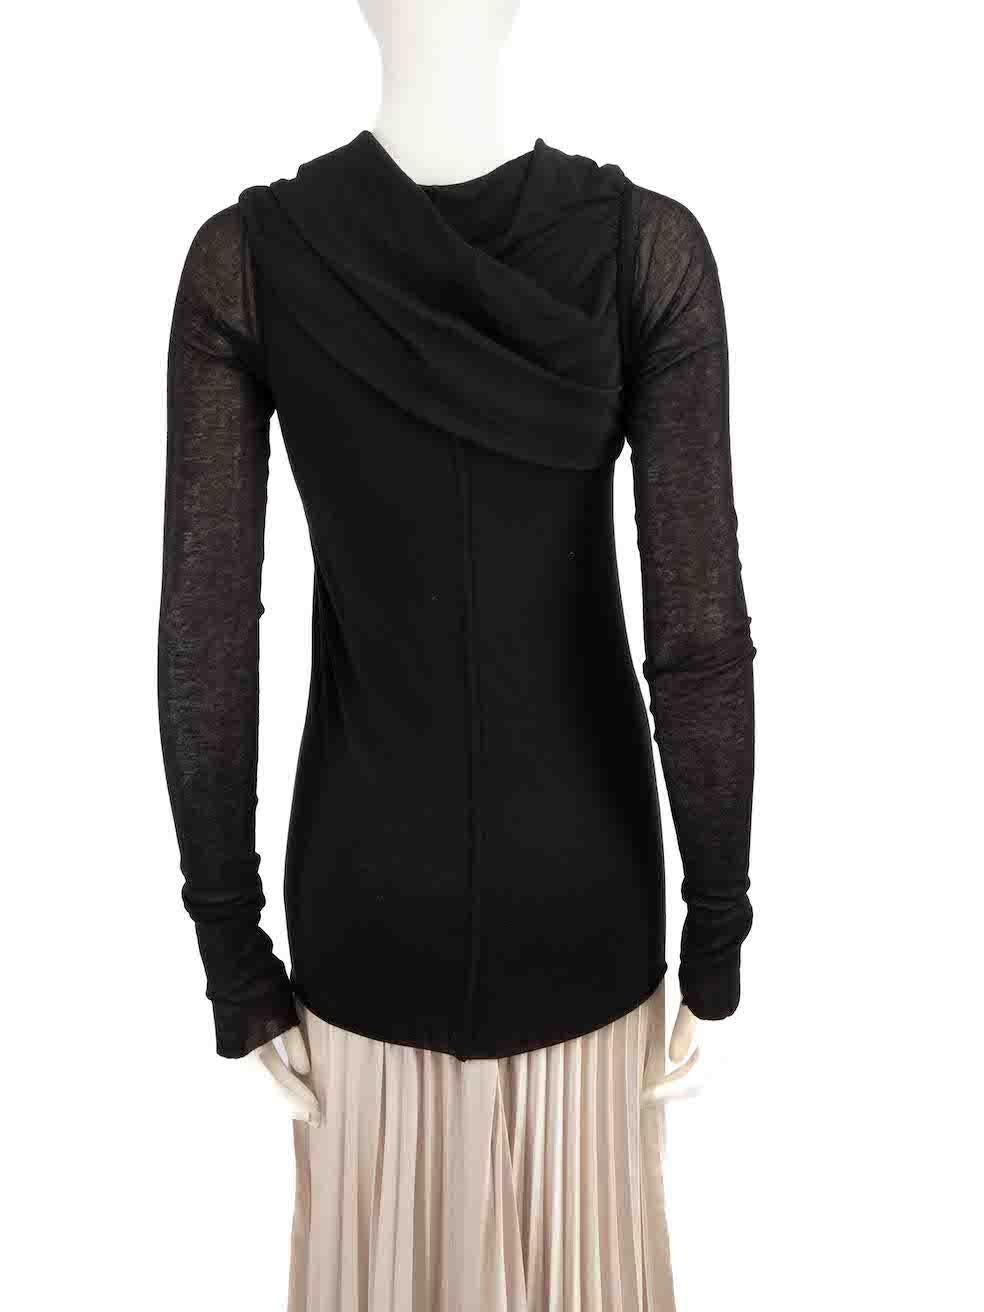 Rick Owens Rick Owens Lilies Black Cowl Neck Draped Top Size XL In Good Condition For Sale In London, GB